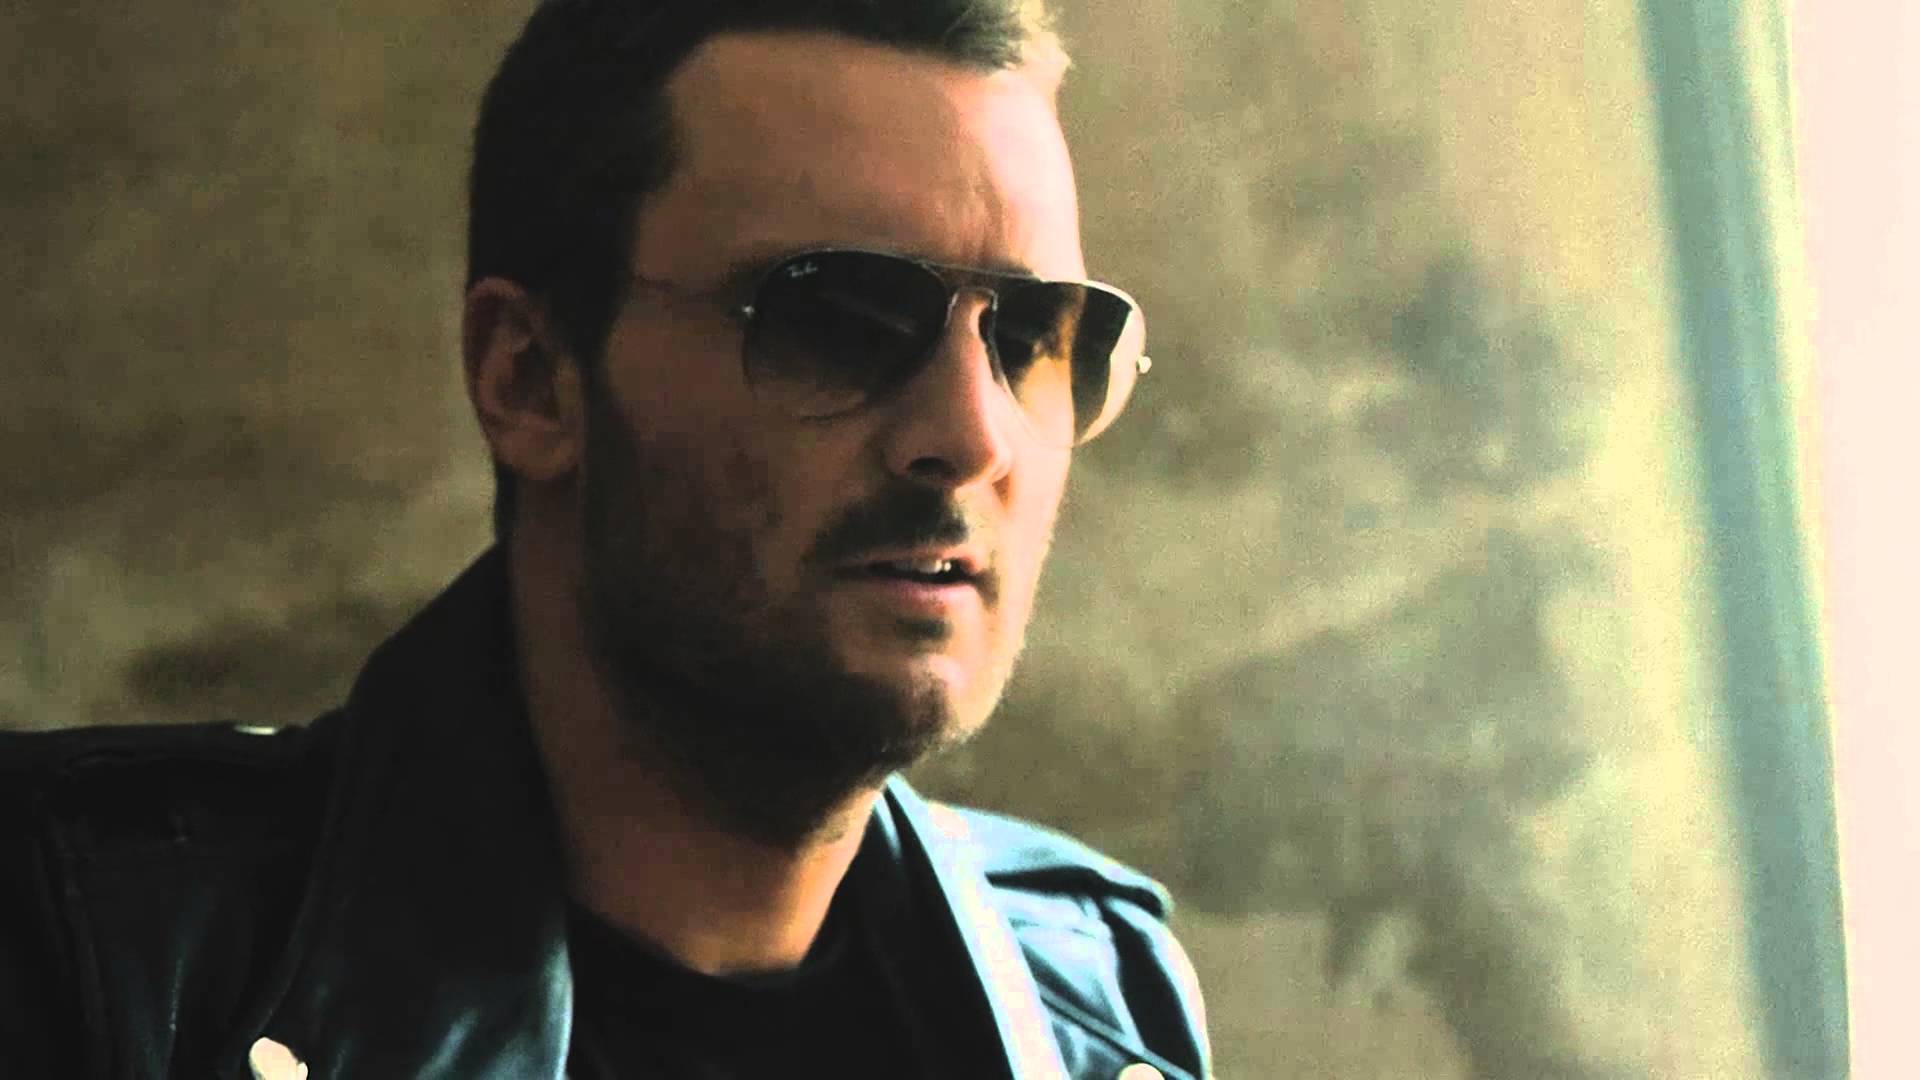 eric church with sunglasses